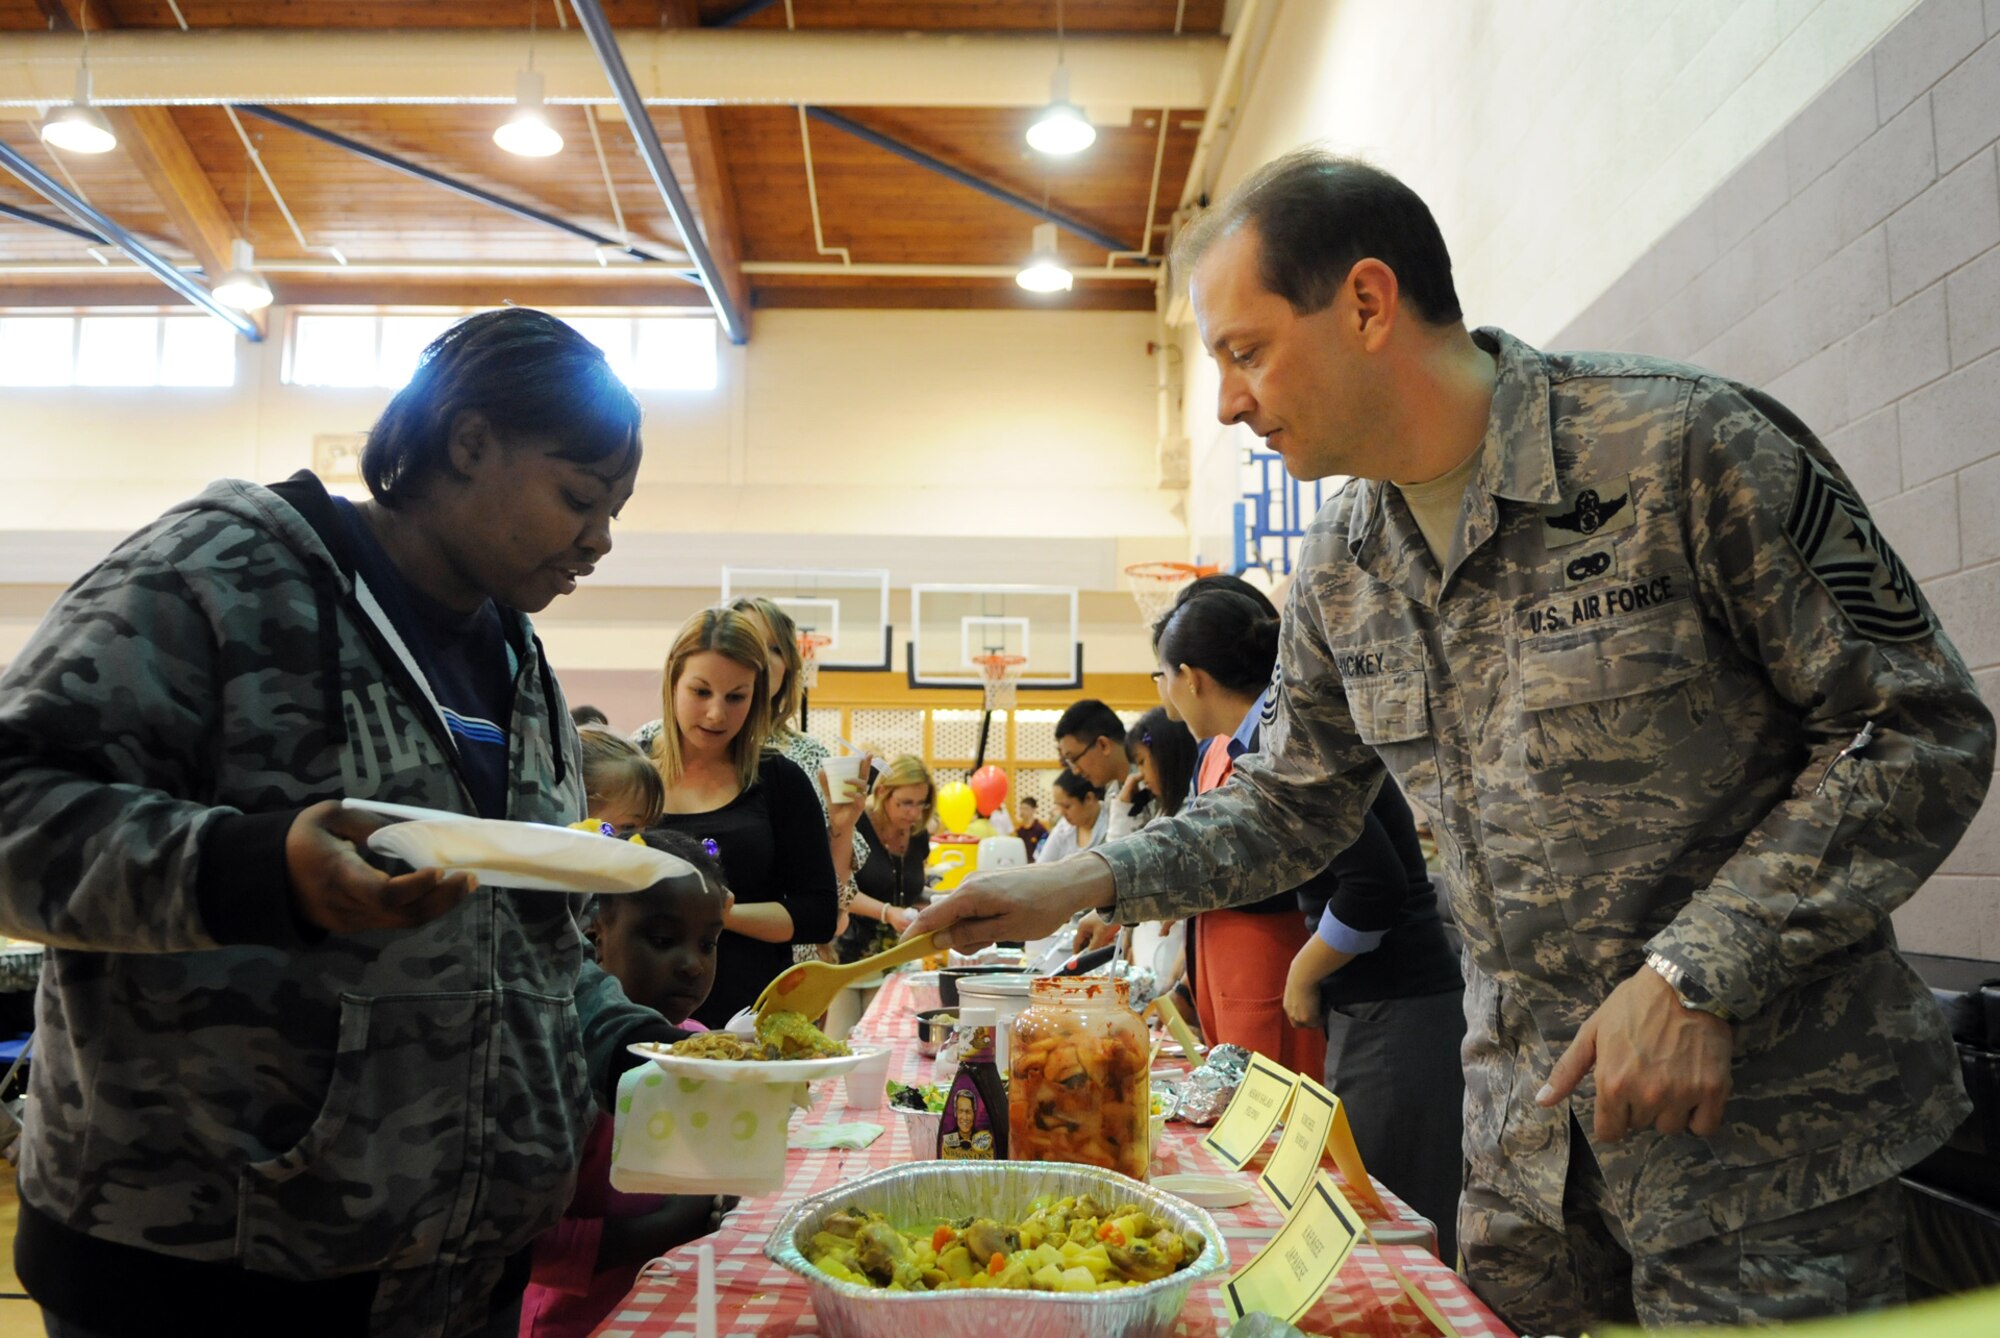 Chief Master Sgt. Antonio Hickey, 100th Air Refueling Wing command chief, serves a plate of Japanese Karagee to Felicia Smith, whose husband Darick is deployed, at the May 20 Hearts Apart event.  In addition to food, the Asian Pacific-themed event featured dance and martial arts demonstrations for American and British families of deployed servicemembers.  (U.S. Air Force photo by Staff Sgt. Austin M. May)